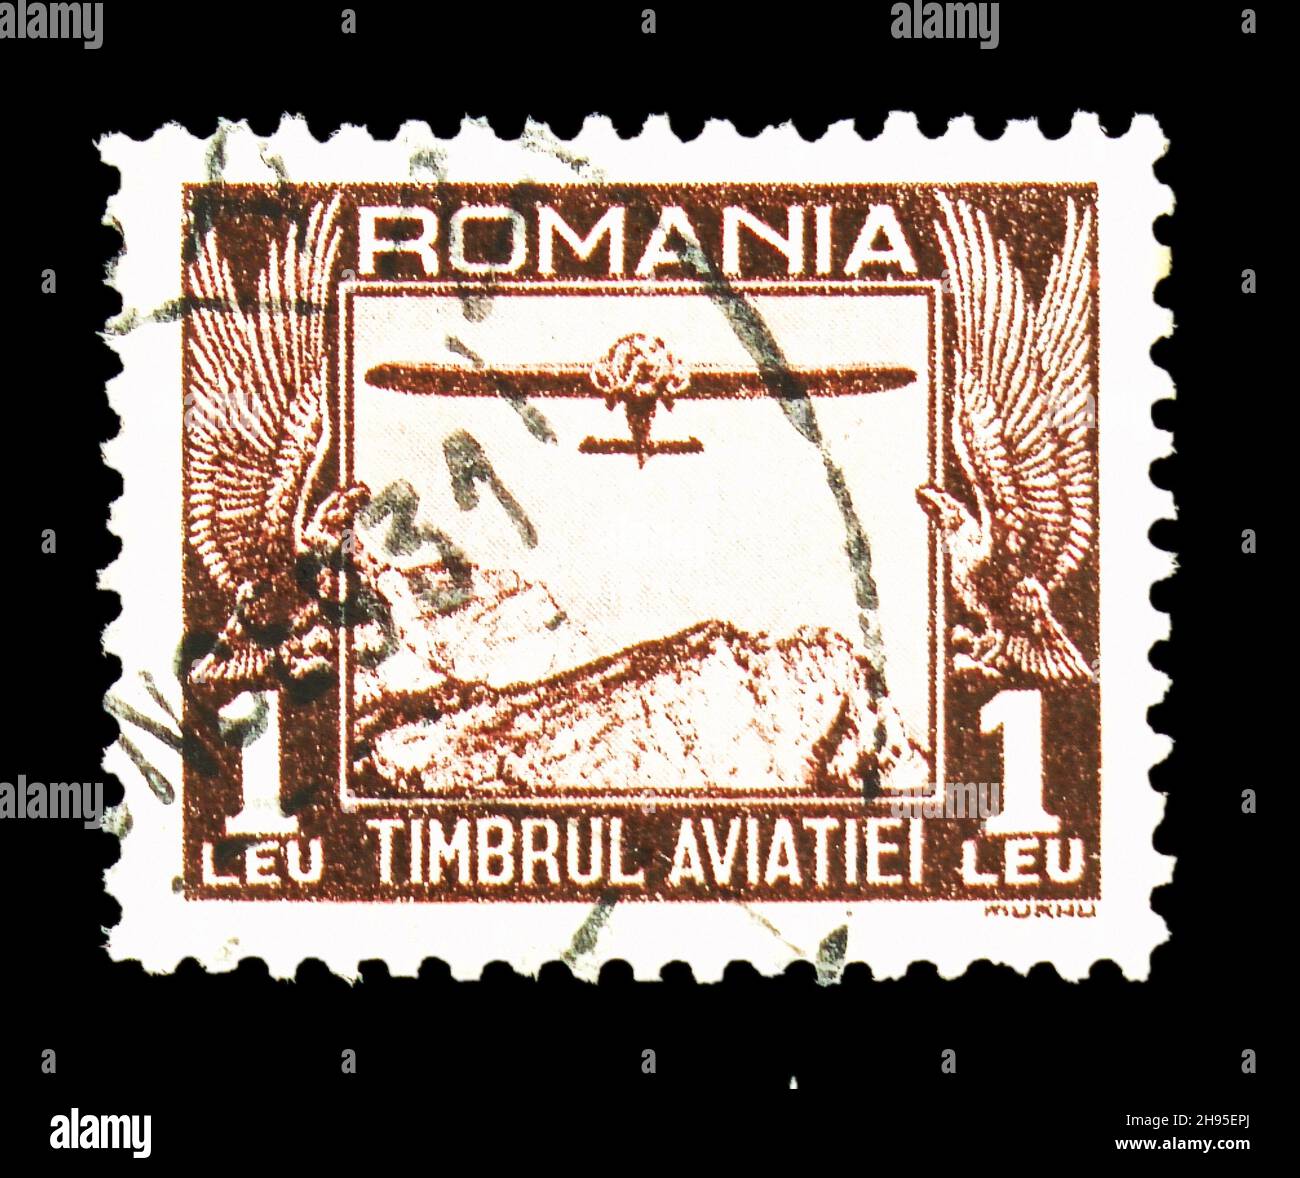 MOSCOW, RUSSIA - OCTOBER 24, 2021: Postage stamp printed in Romania shows Aircraft over Mountainous Landscape, National Fund for Aviation serie, circa Stock Photo